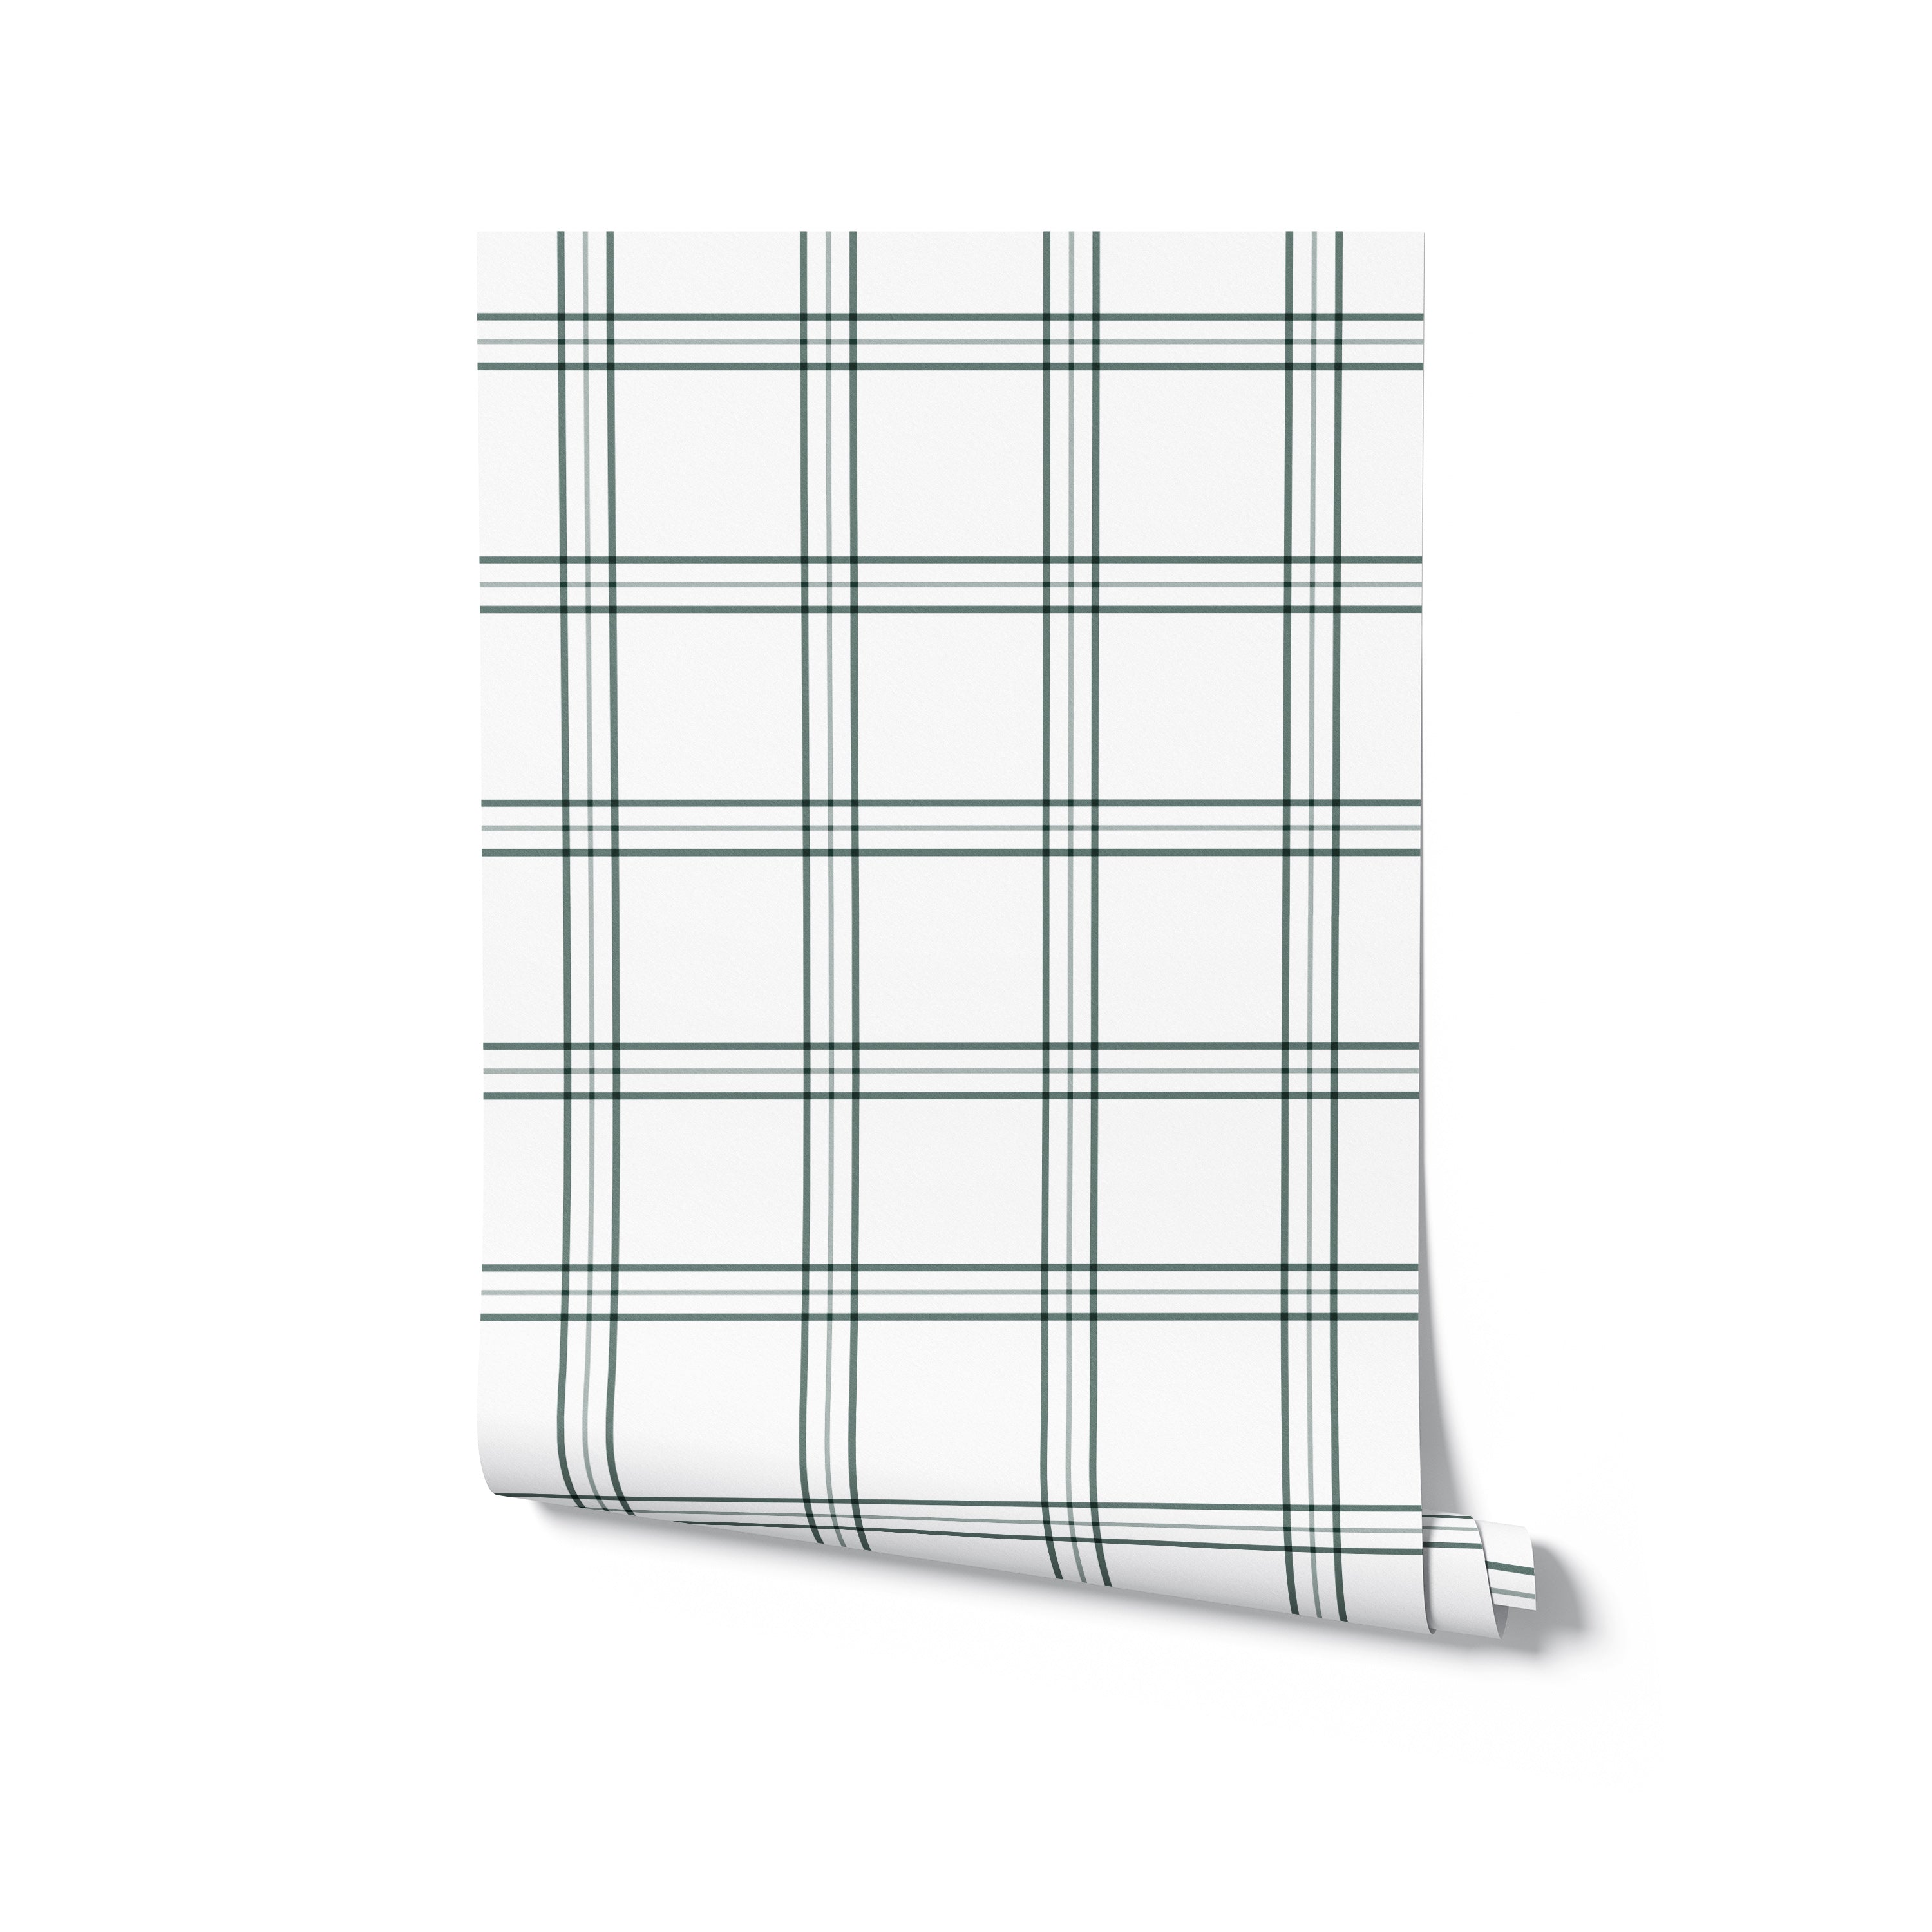 A rolled sample of Traditional Tartan Plaid Wallpaper highlighting the fabric-like texture and timeless pattern of hunter green stripes, suggesting a design that could bring a sense of heritage and comfort to interiors ranging from the modern to the classic.